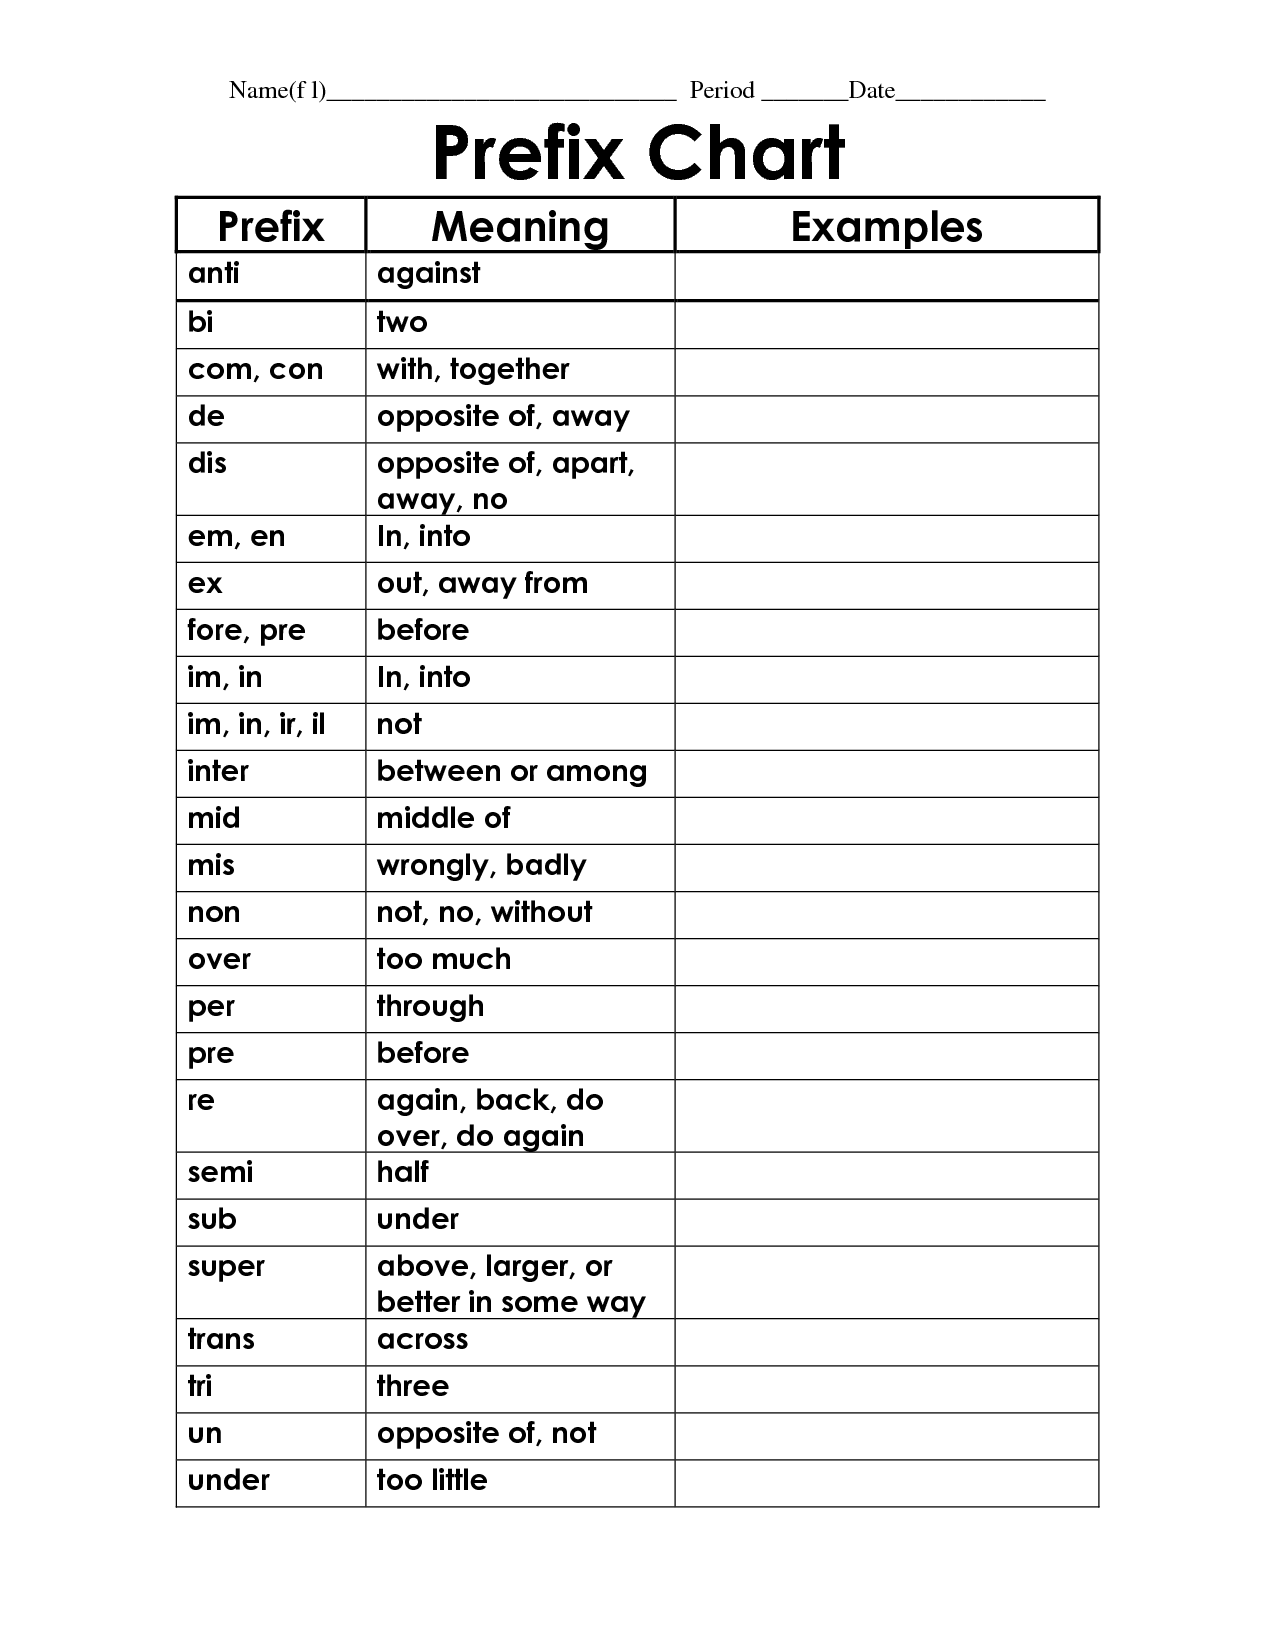 18-best-images-of-i-ve-suffix-worksheets-prefix-meanings-chart-sarah